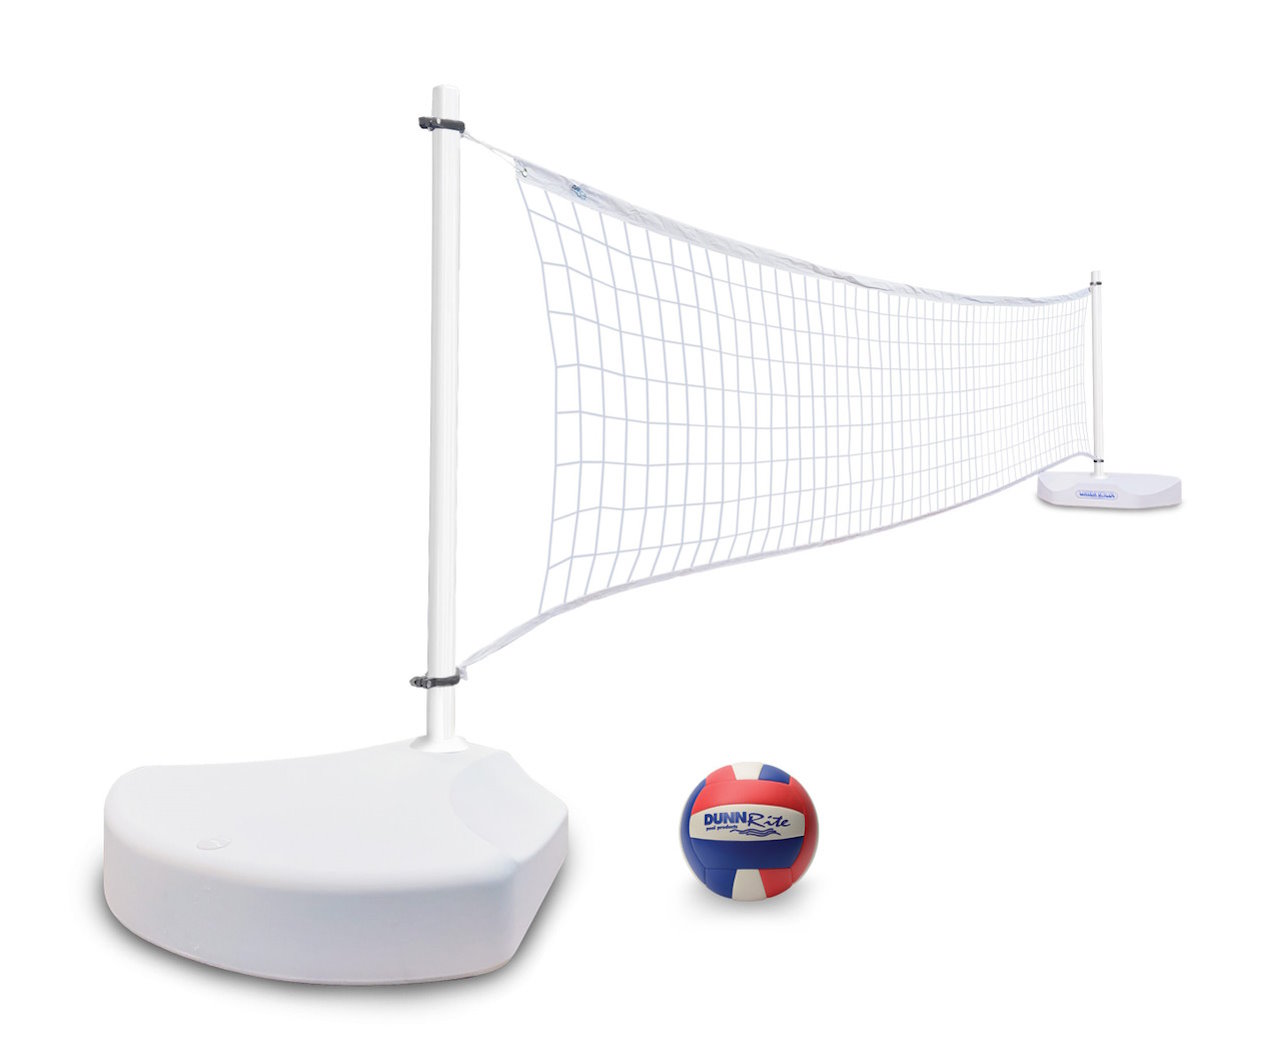 WaterVolly - Portable Pool Volleyball